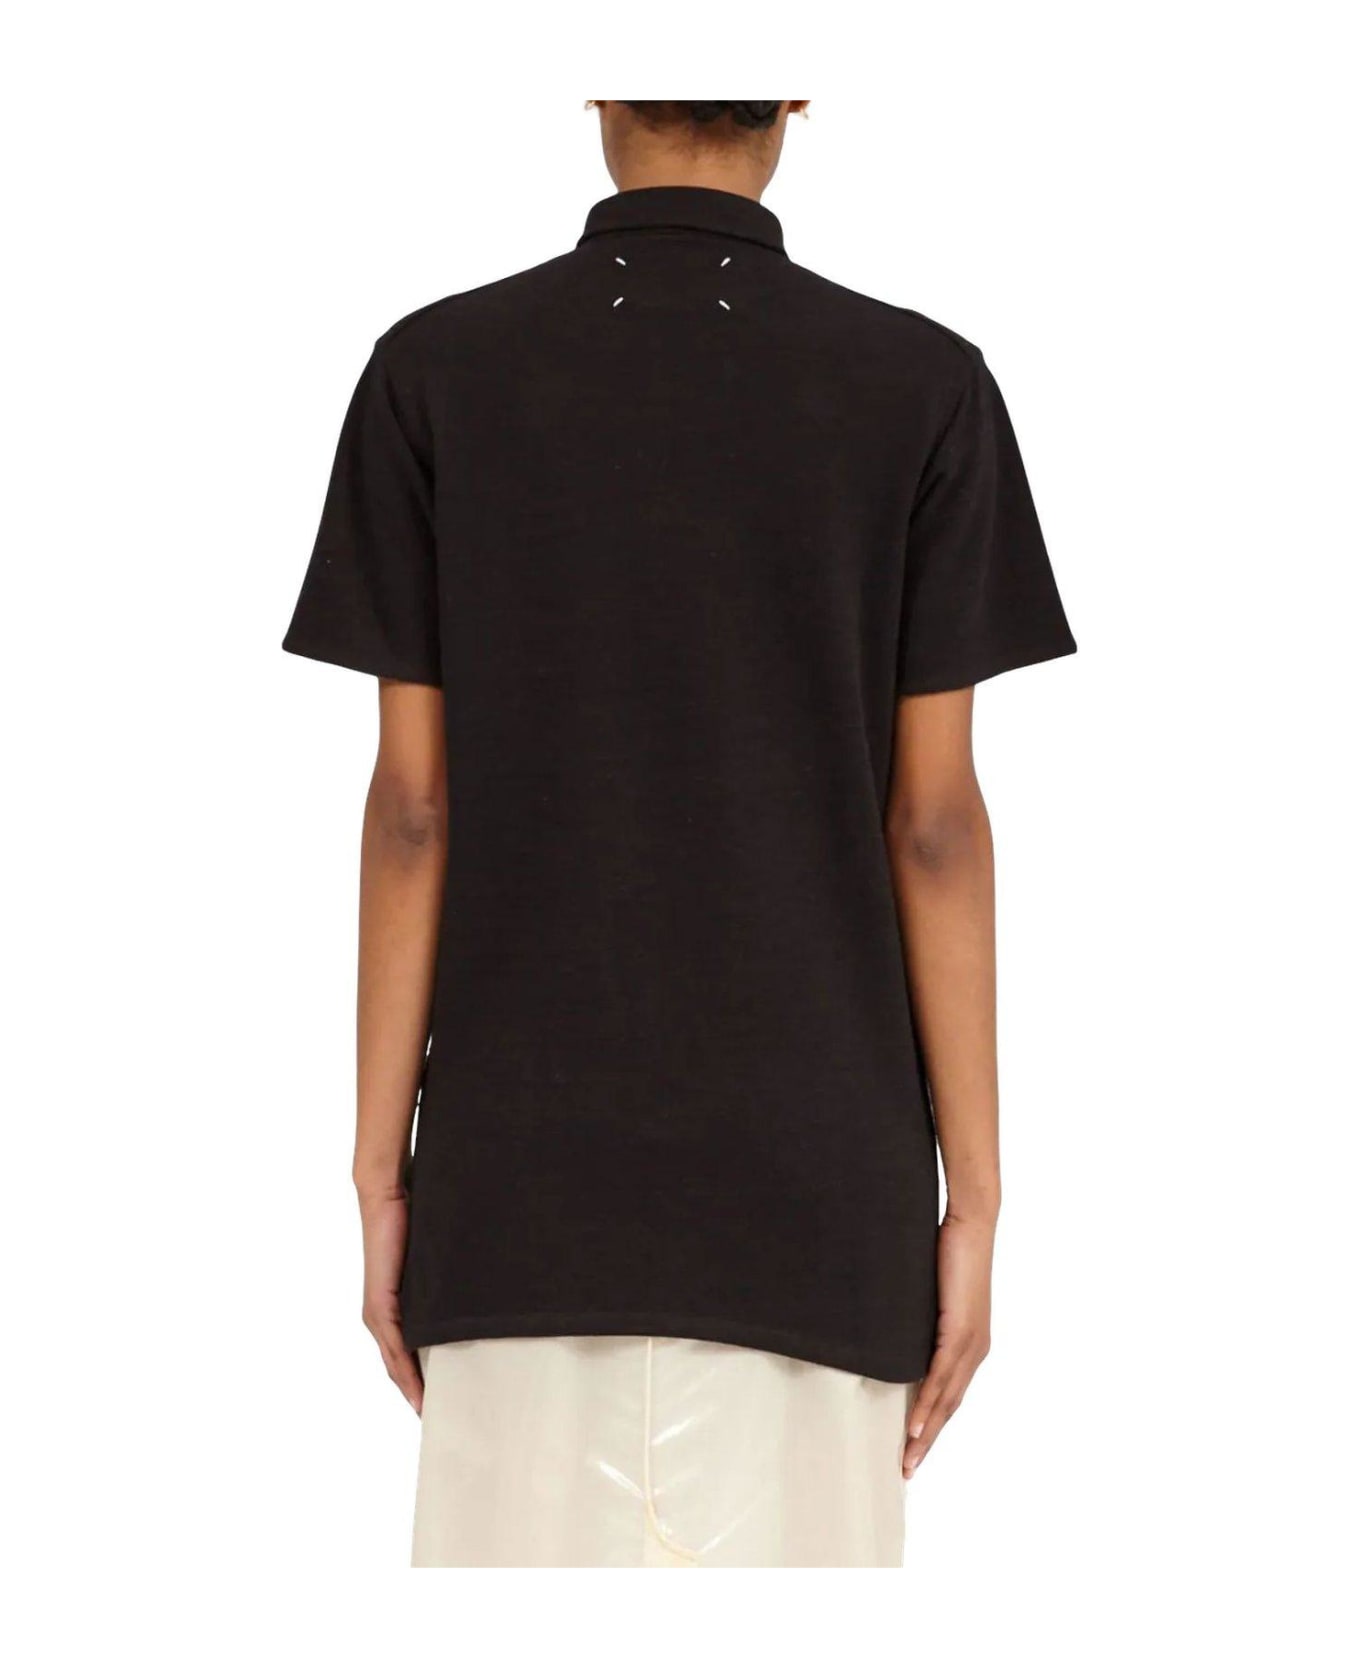 Maison Margiela Collared Knit Polo Shirt - Brown ポロシャツ